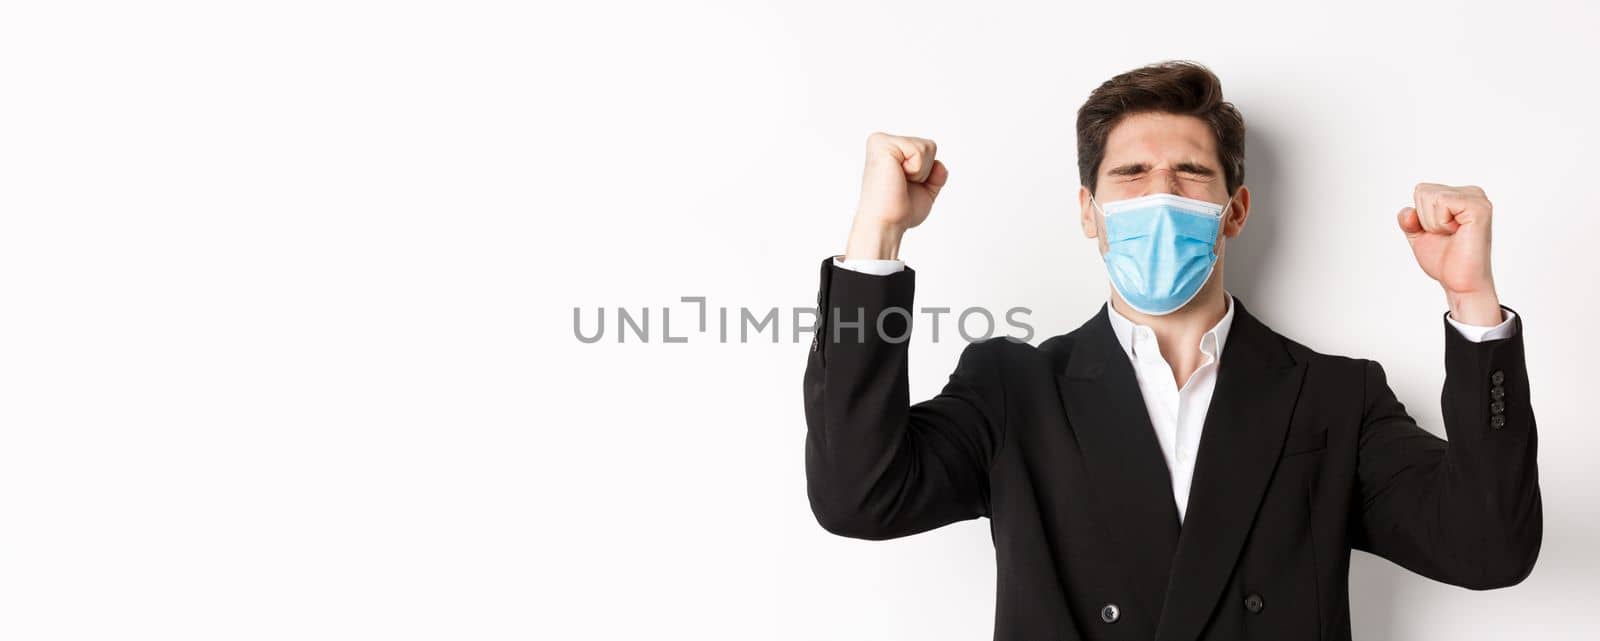 Concept of covid-19, business and social distancing. Close-up of handsome man in suit and medical mask, rejoicing and winning, raising hands up, shouting yes.